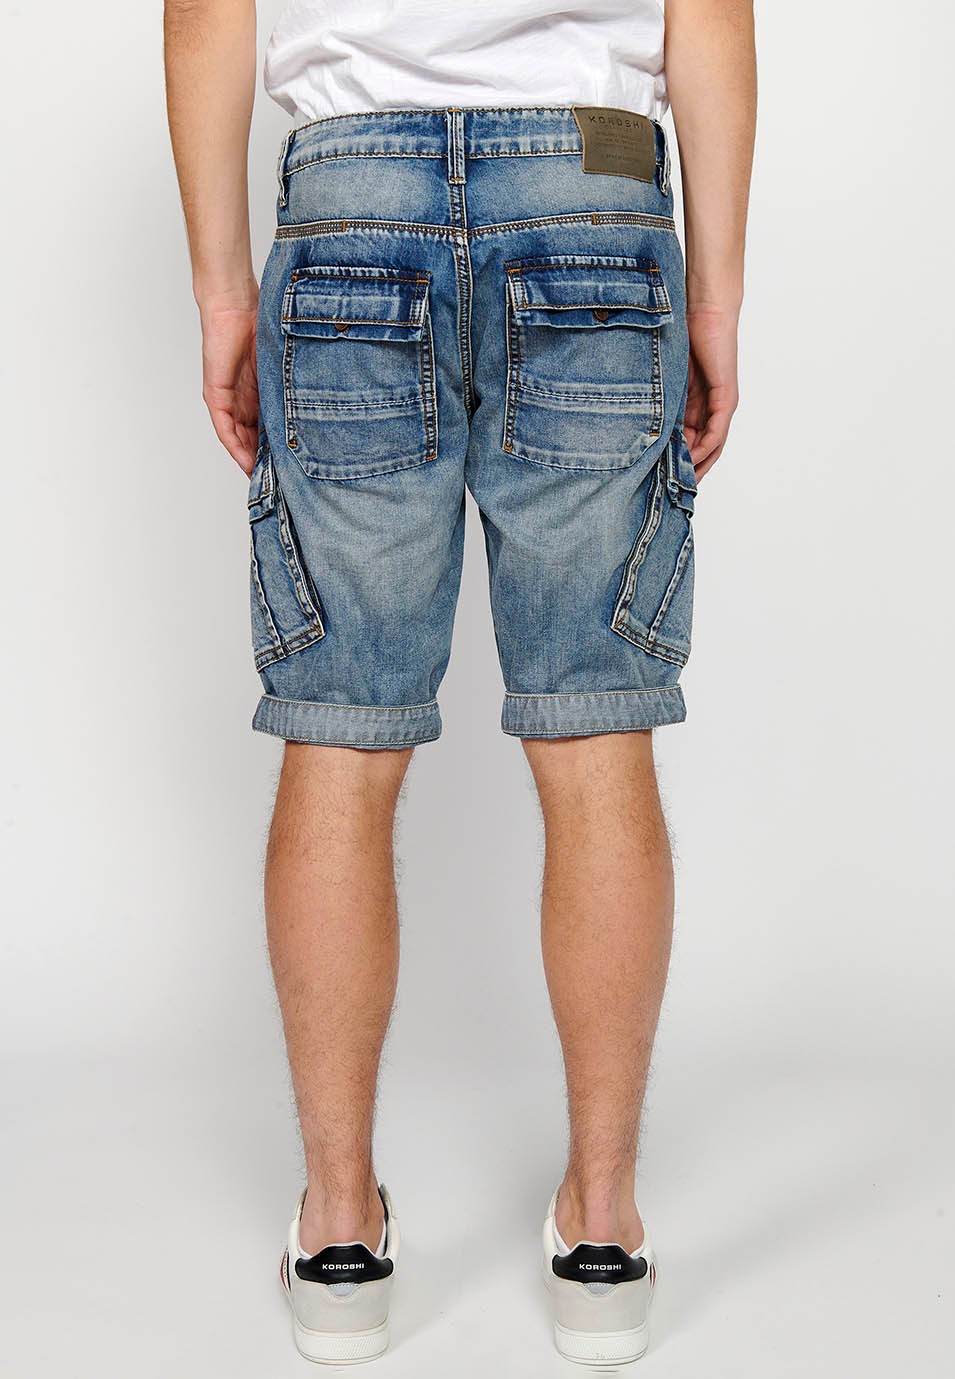 Denim Bermuda cargo shorts with front zipper and button closure with five pockets, one blue pocket pocket for Men 7